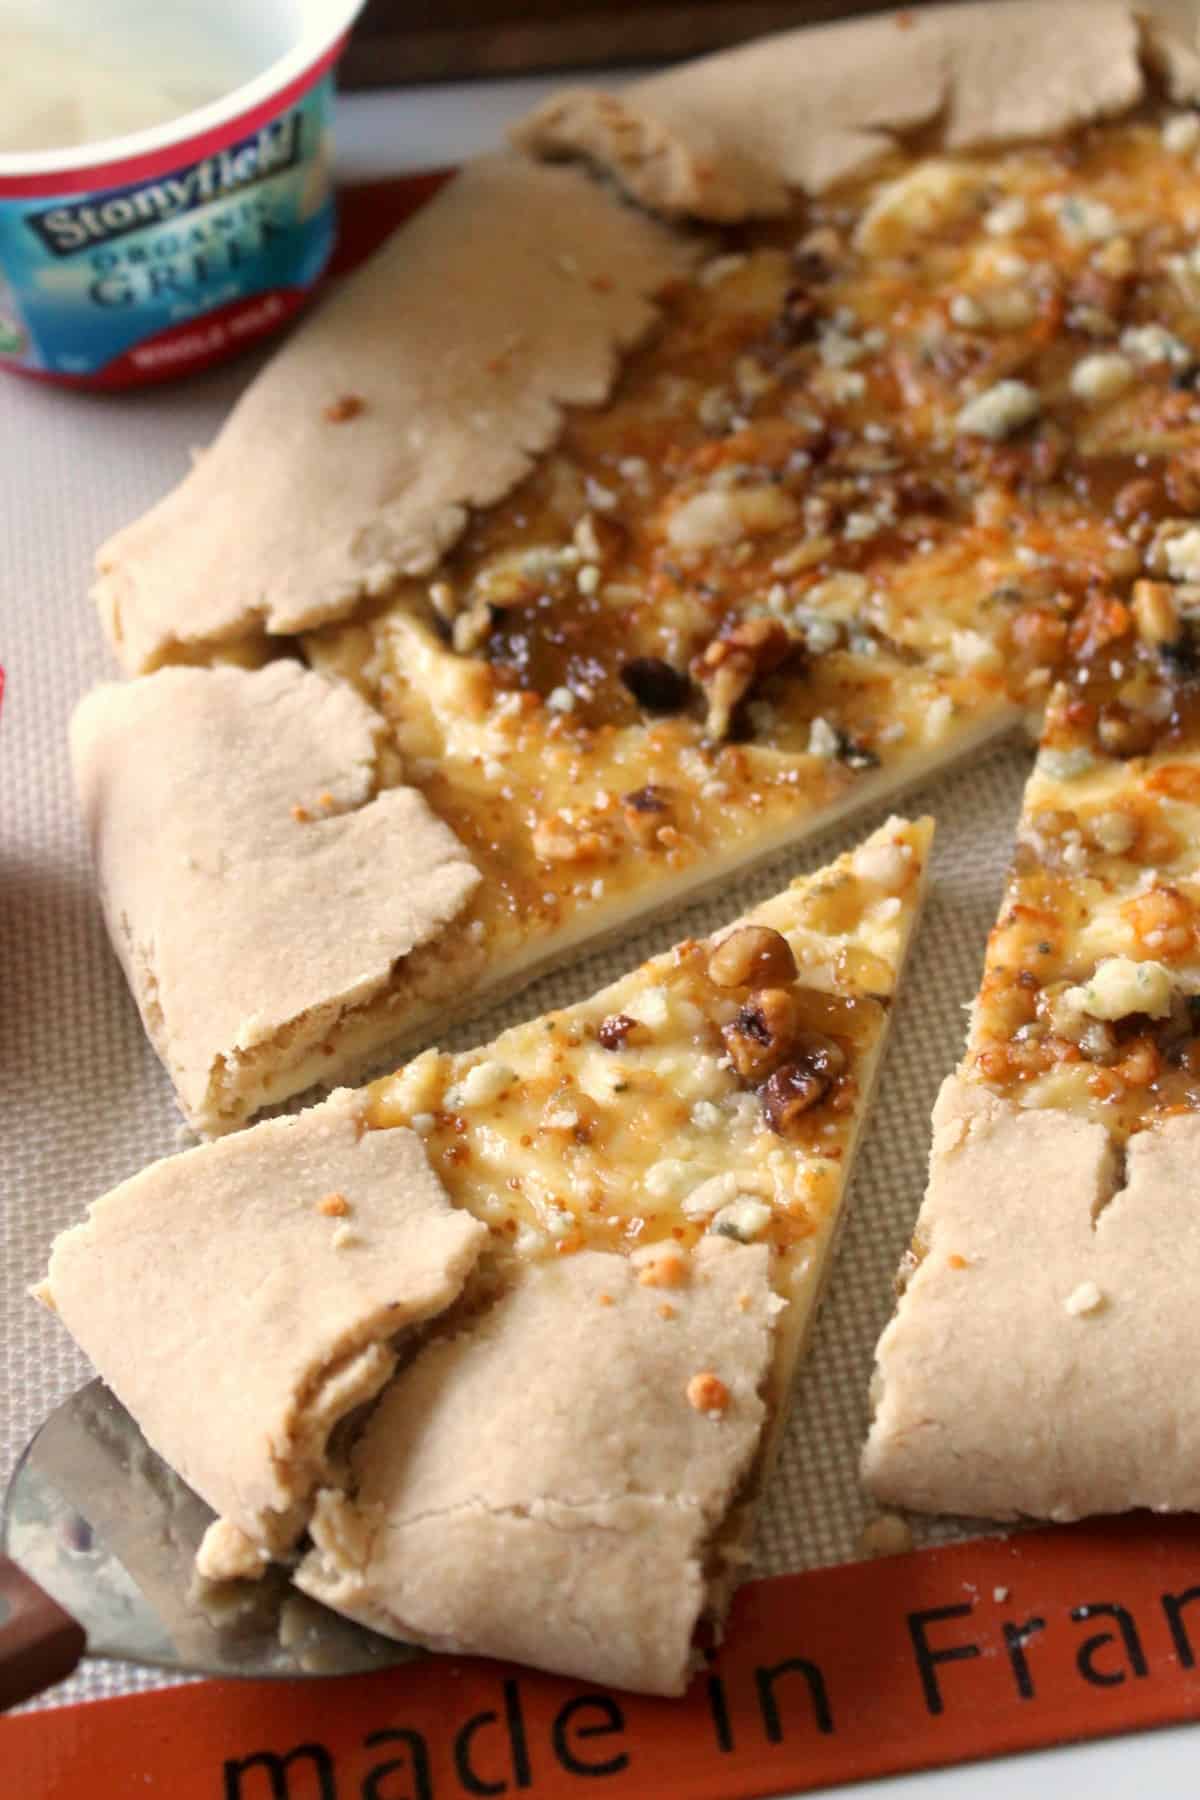 Gorgonzola & Fig Jam Crostata. A tender, rustic tart slathered with a creamy filling and fig jam swirl, topped with savory Gorgonzola cheese and walnuts.